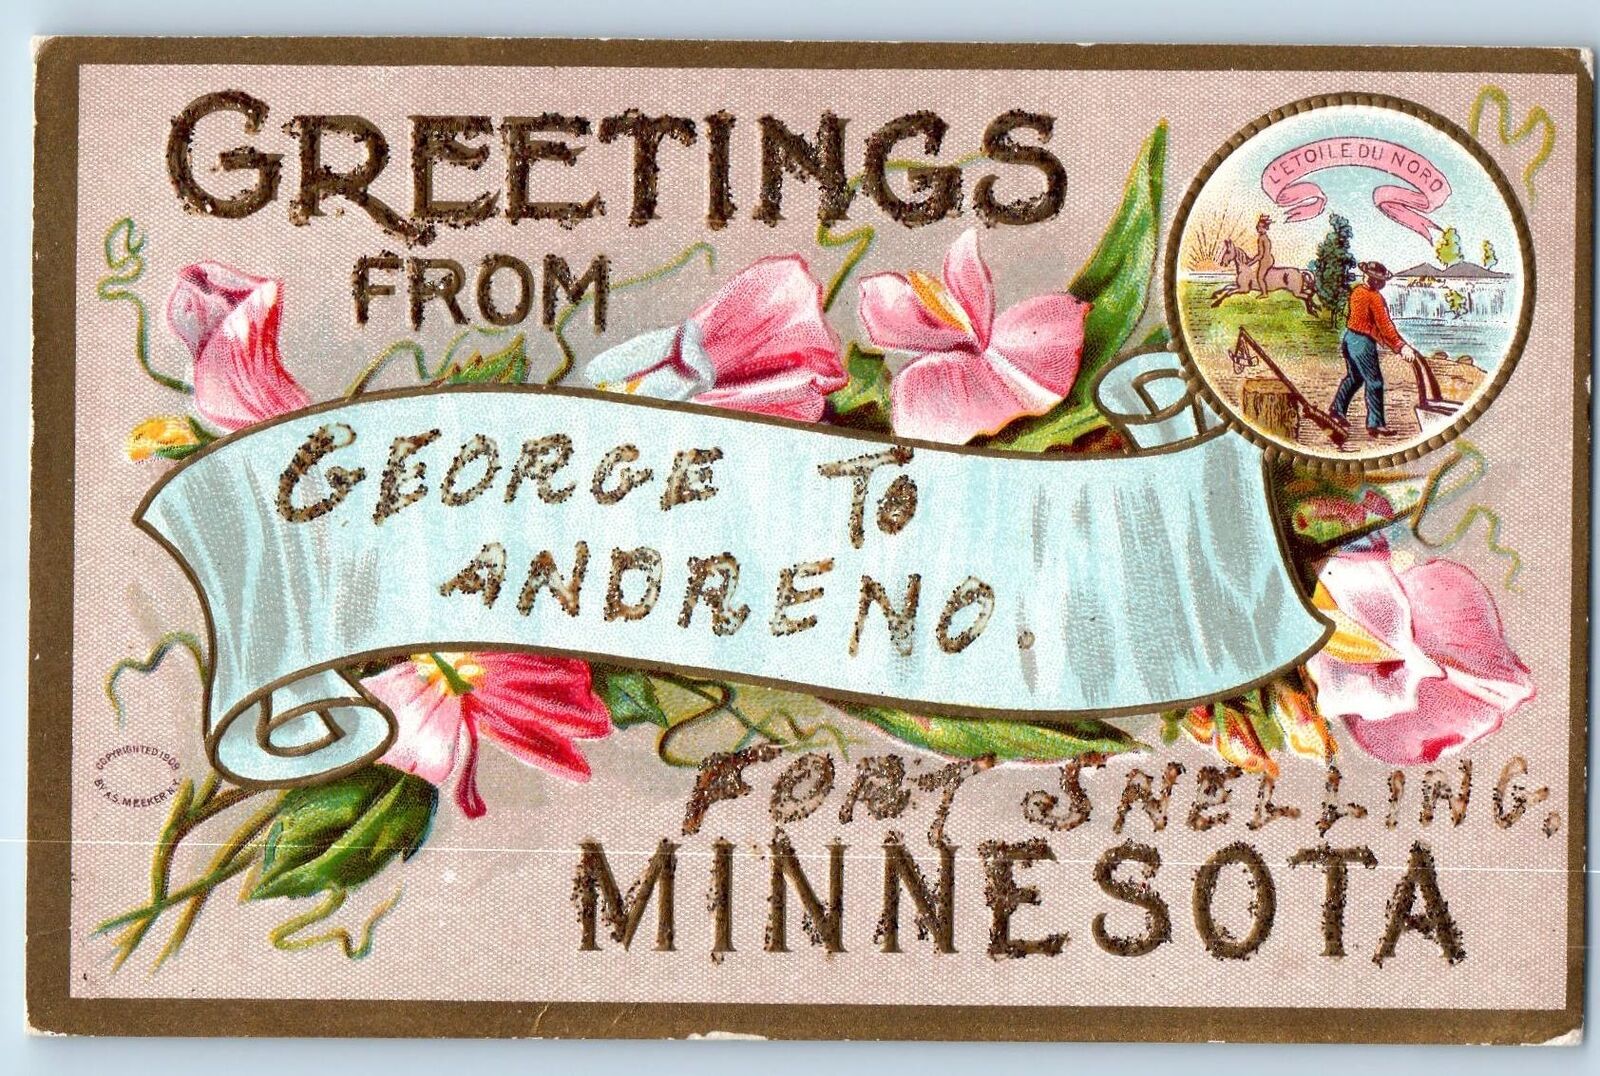 Fort Snelling Minnesota Postcard Greetings From George To Andreno Embossed c1920